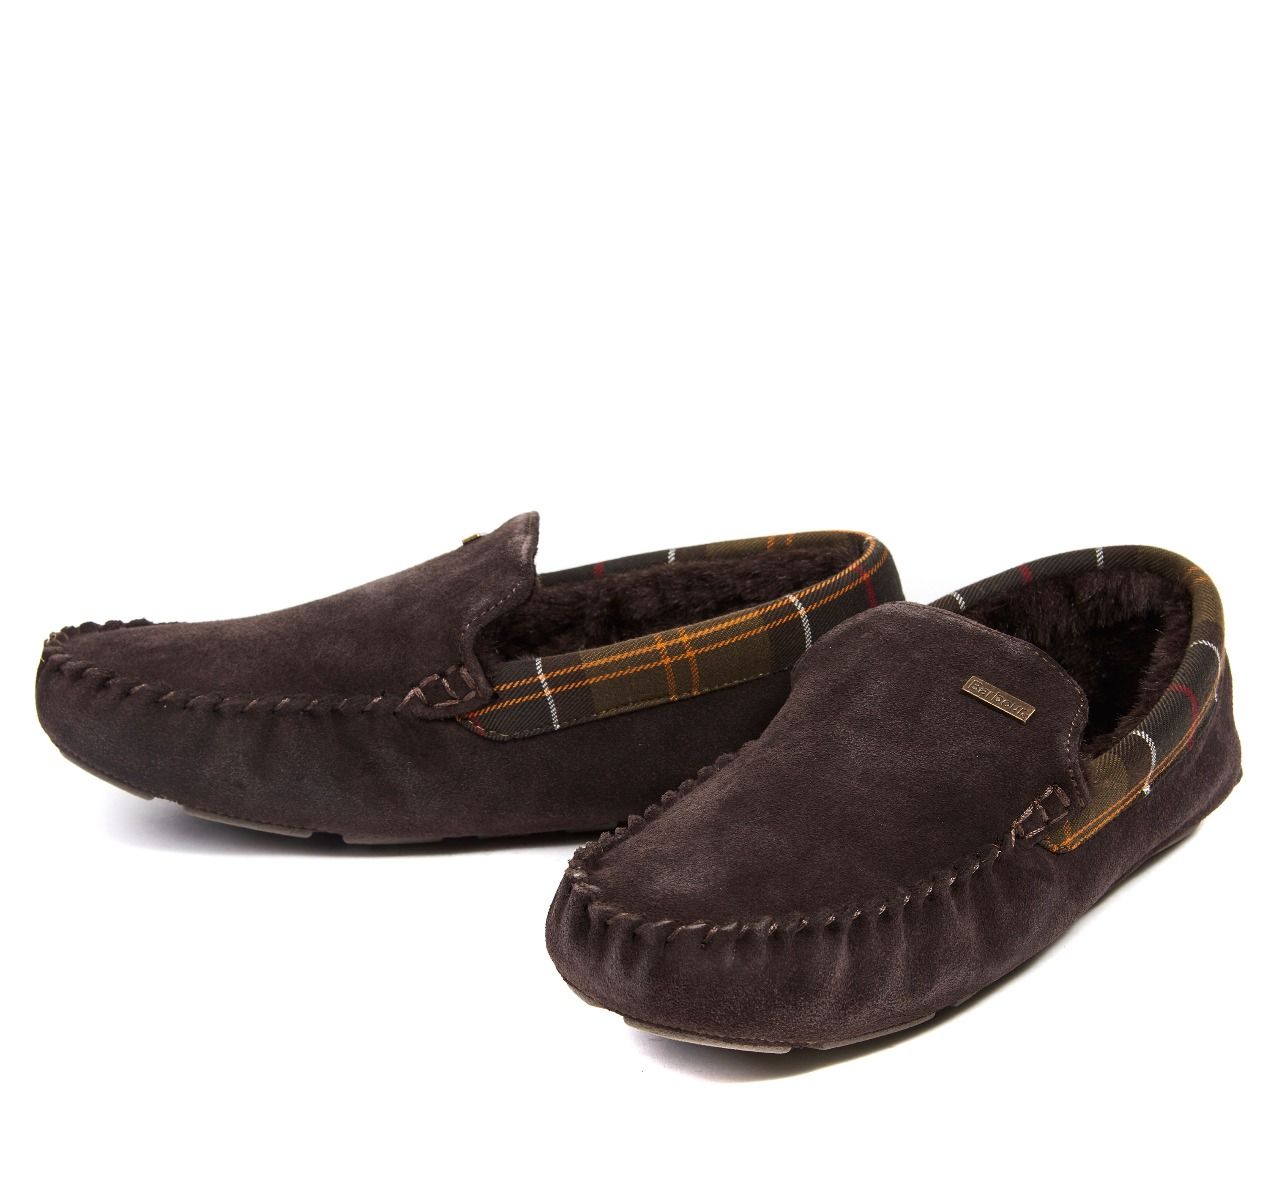 Barbour Monty Brown Slippers